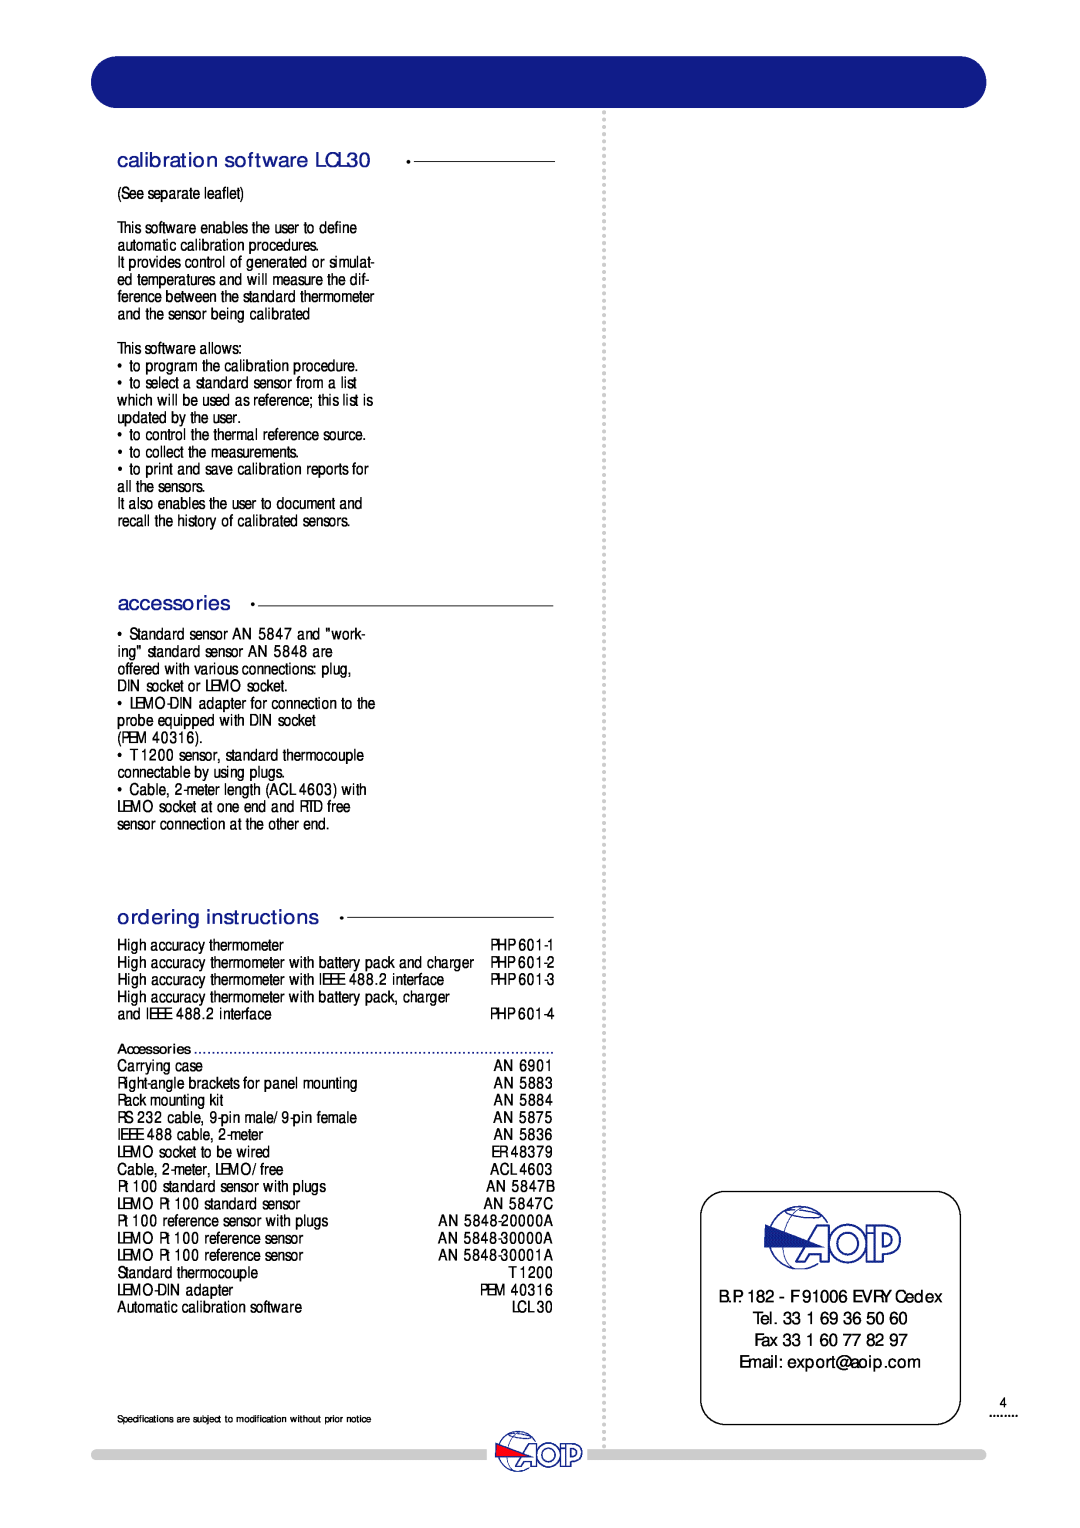 Thermo-Serv PHP601 manual calibration software LCL30, accessories, ordering instructions 